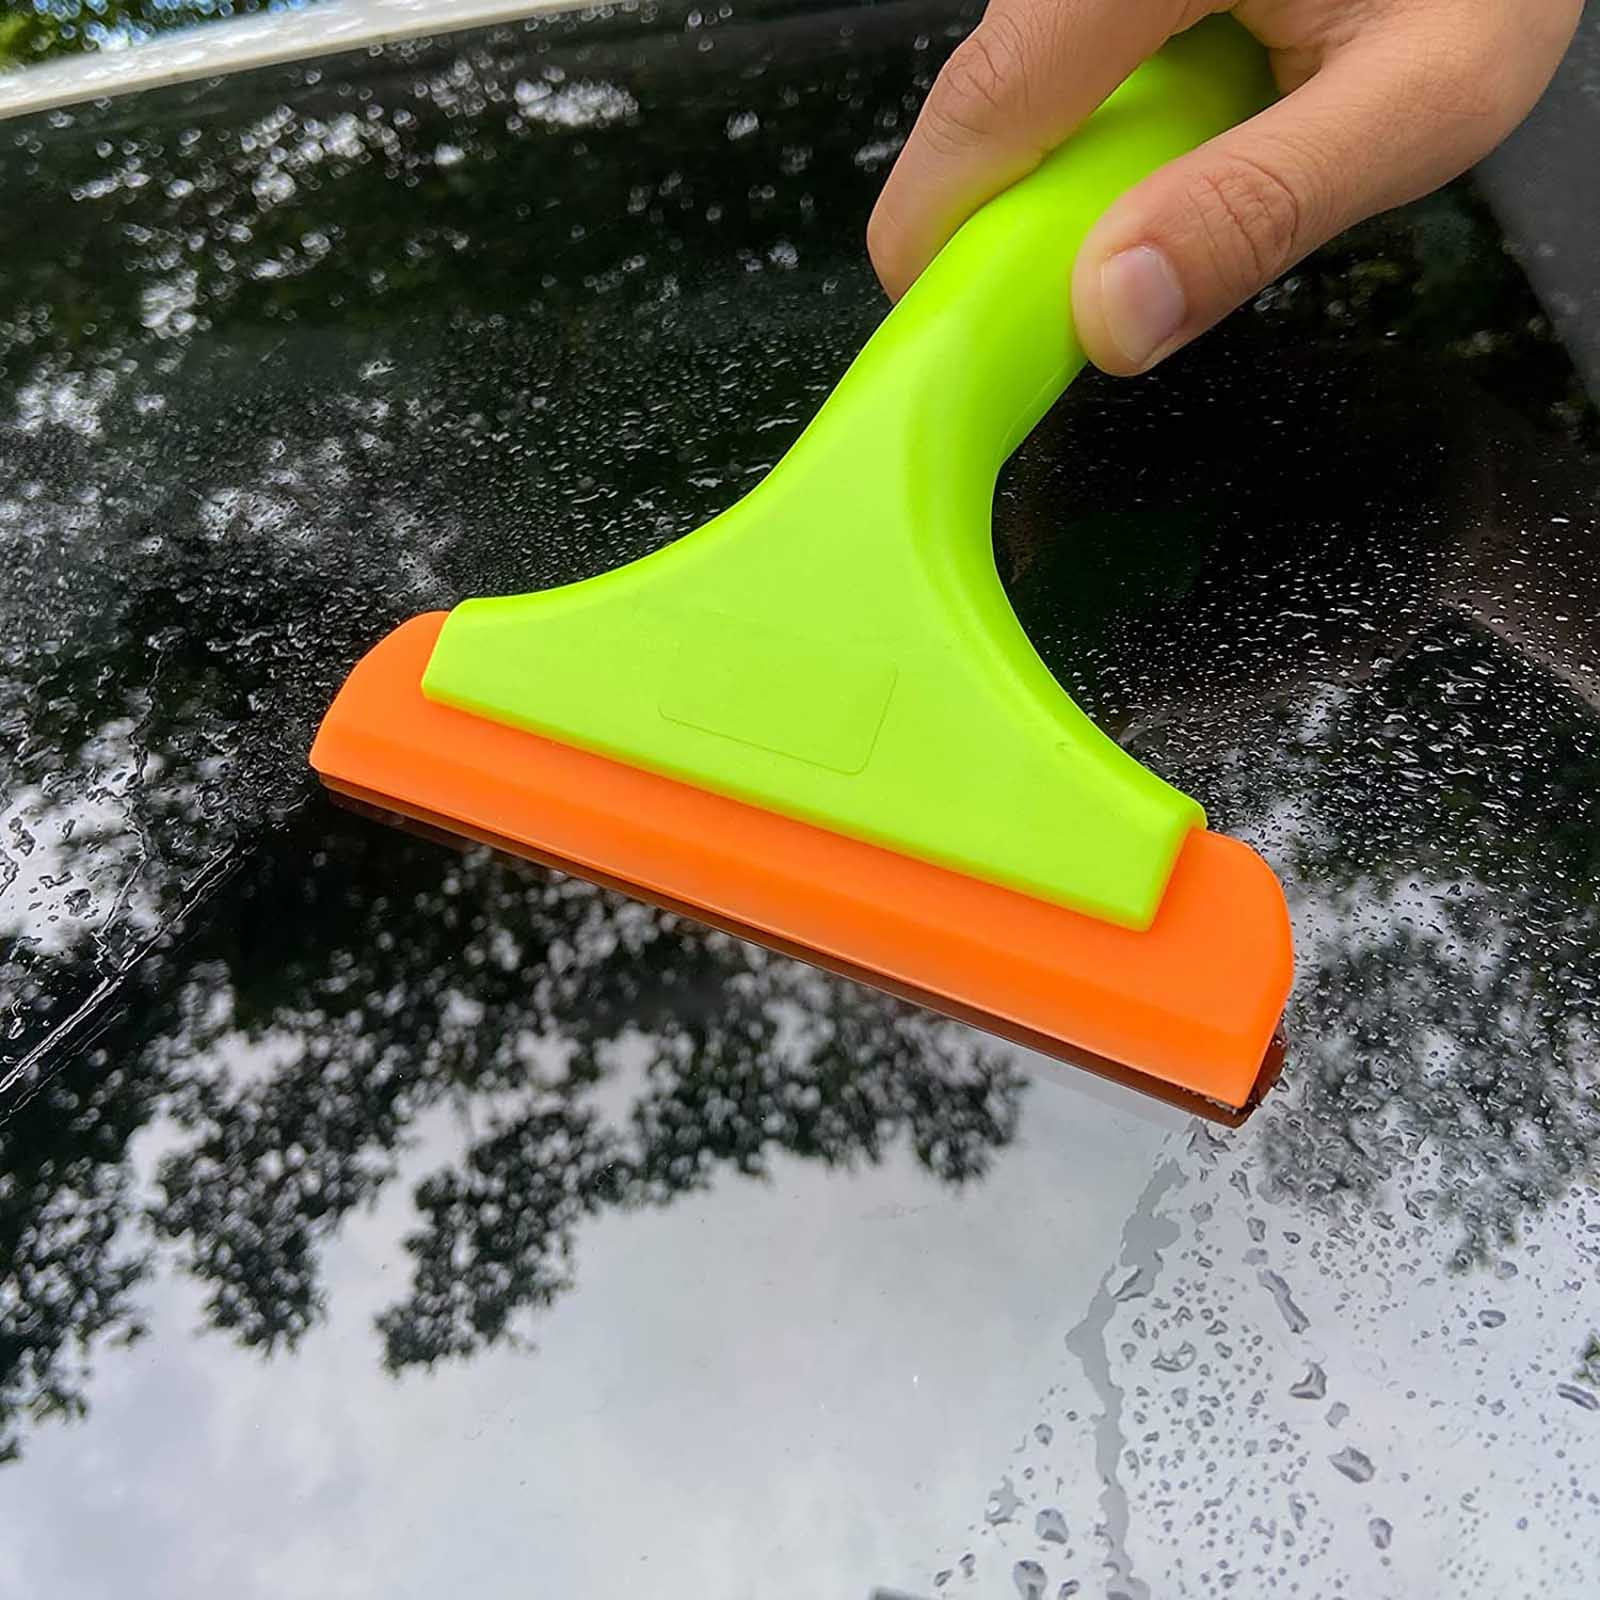  Gomake Small Rubber Squeegee Window Shower Squeegee Cleaning  Kit,Auto Water Blade Squeegee for Shower Glass Door,Car Windshield, Window,  Mirror, Bathroom,Countertop Cleaning : Health & Household